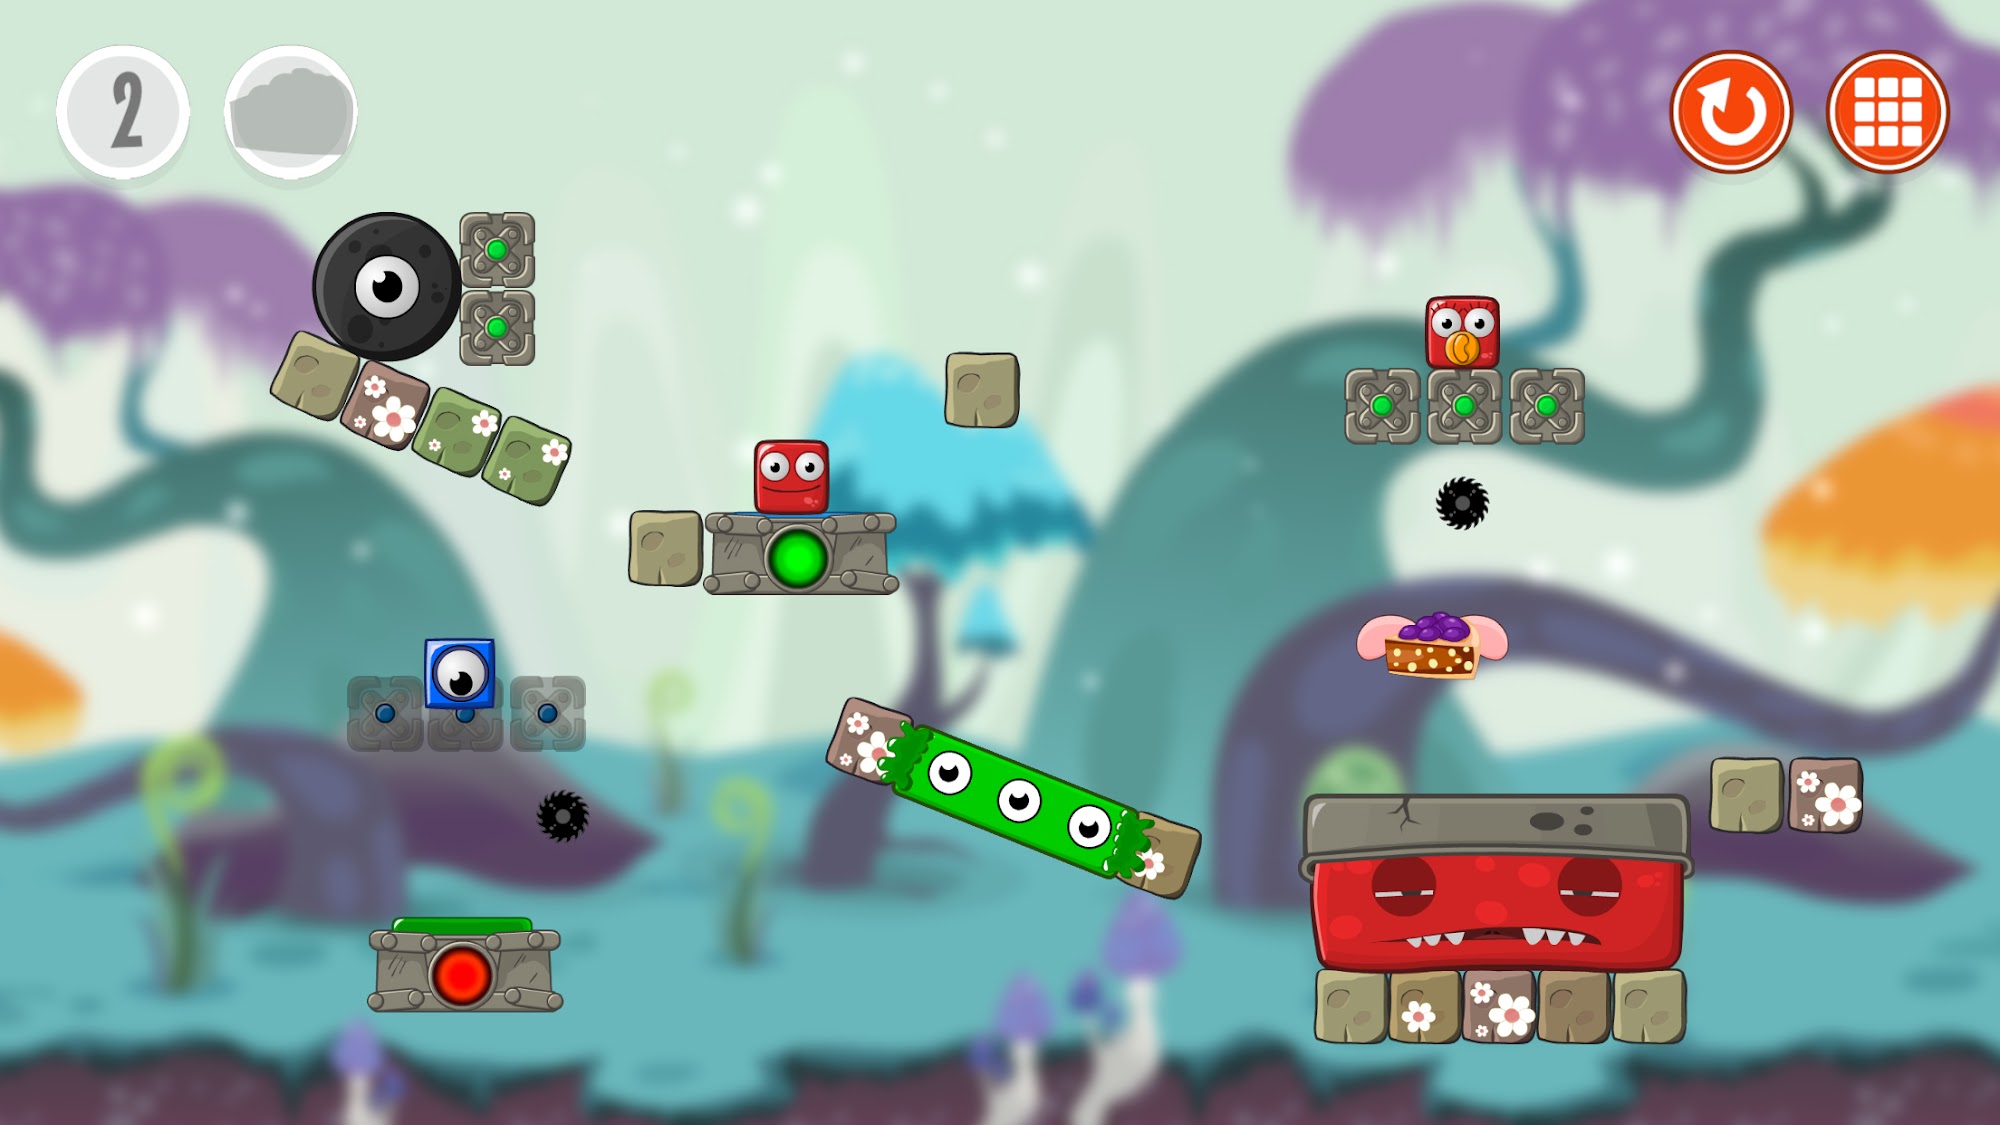 Monsterland 2. Physics puzzle game for Android